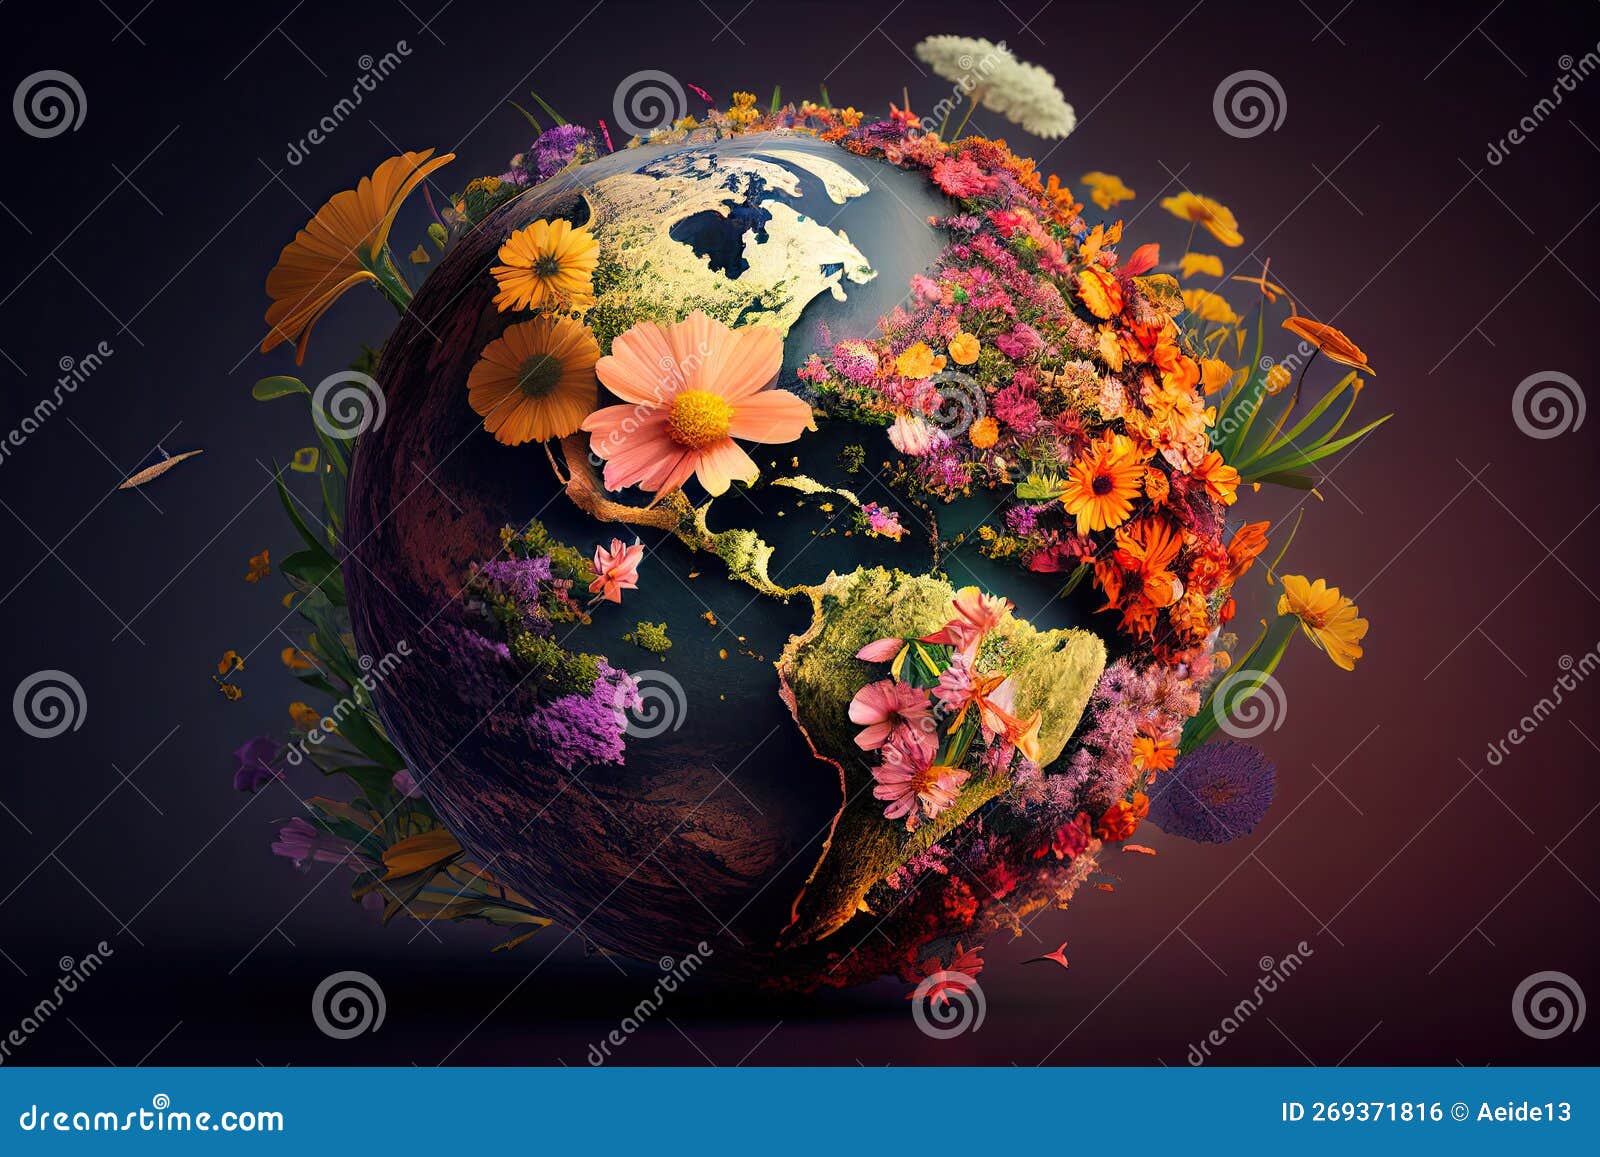 https://thumbs.dreamstime.com/z/earth-day-planet-mother-earth-flowers-growing-continents-america-oceans-lands-environment-earth-day-269371816.jpg